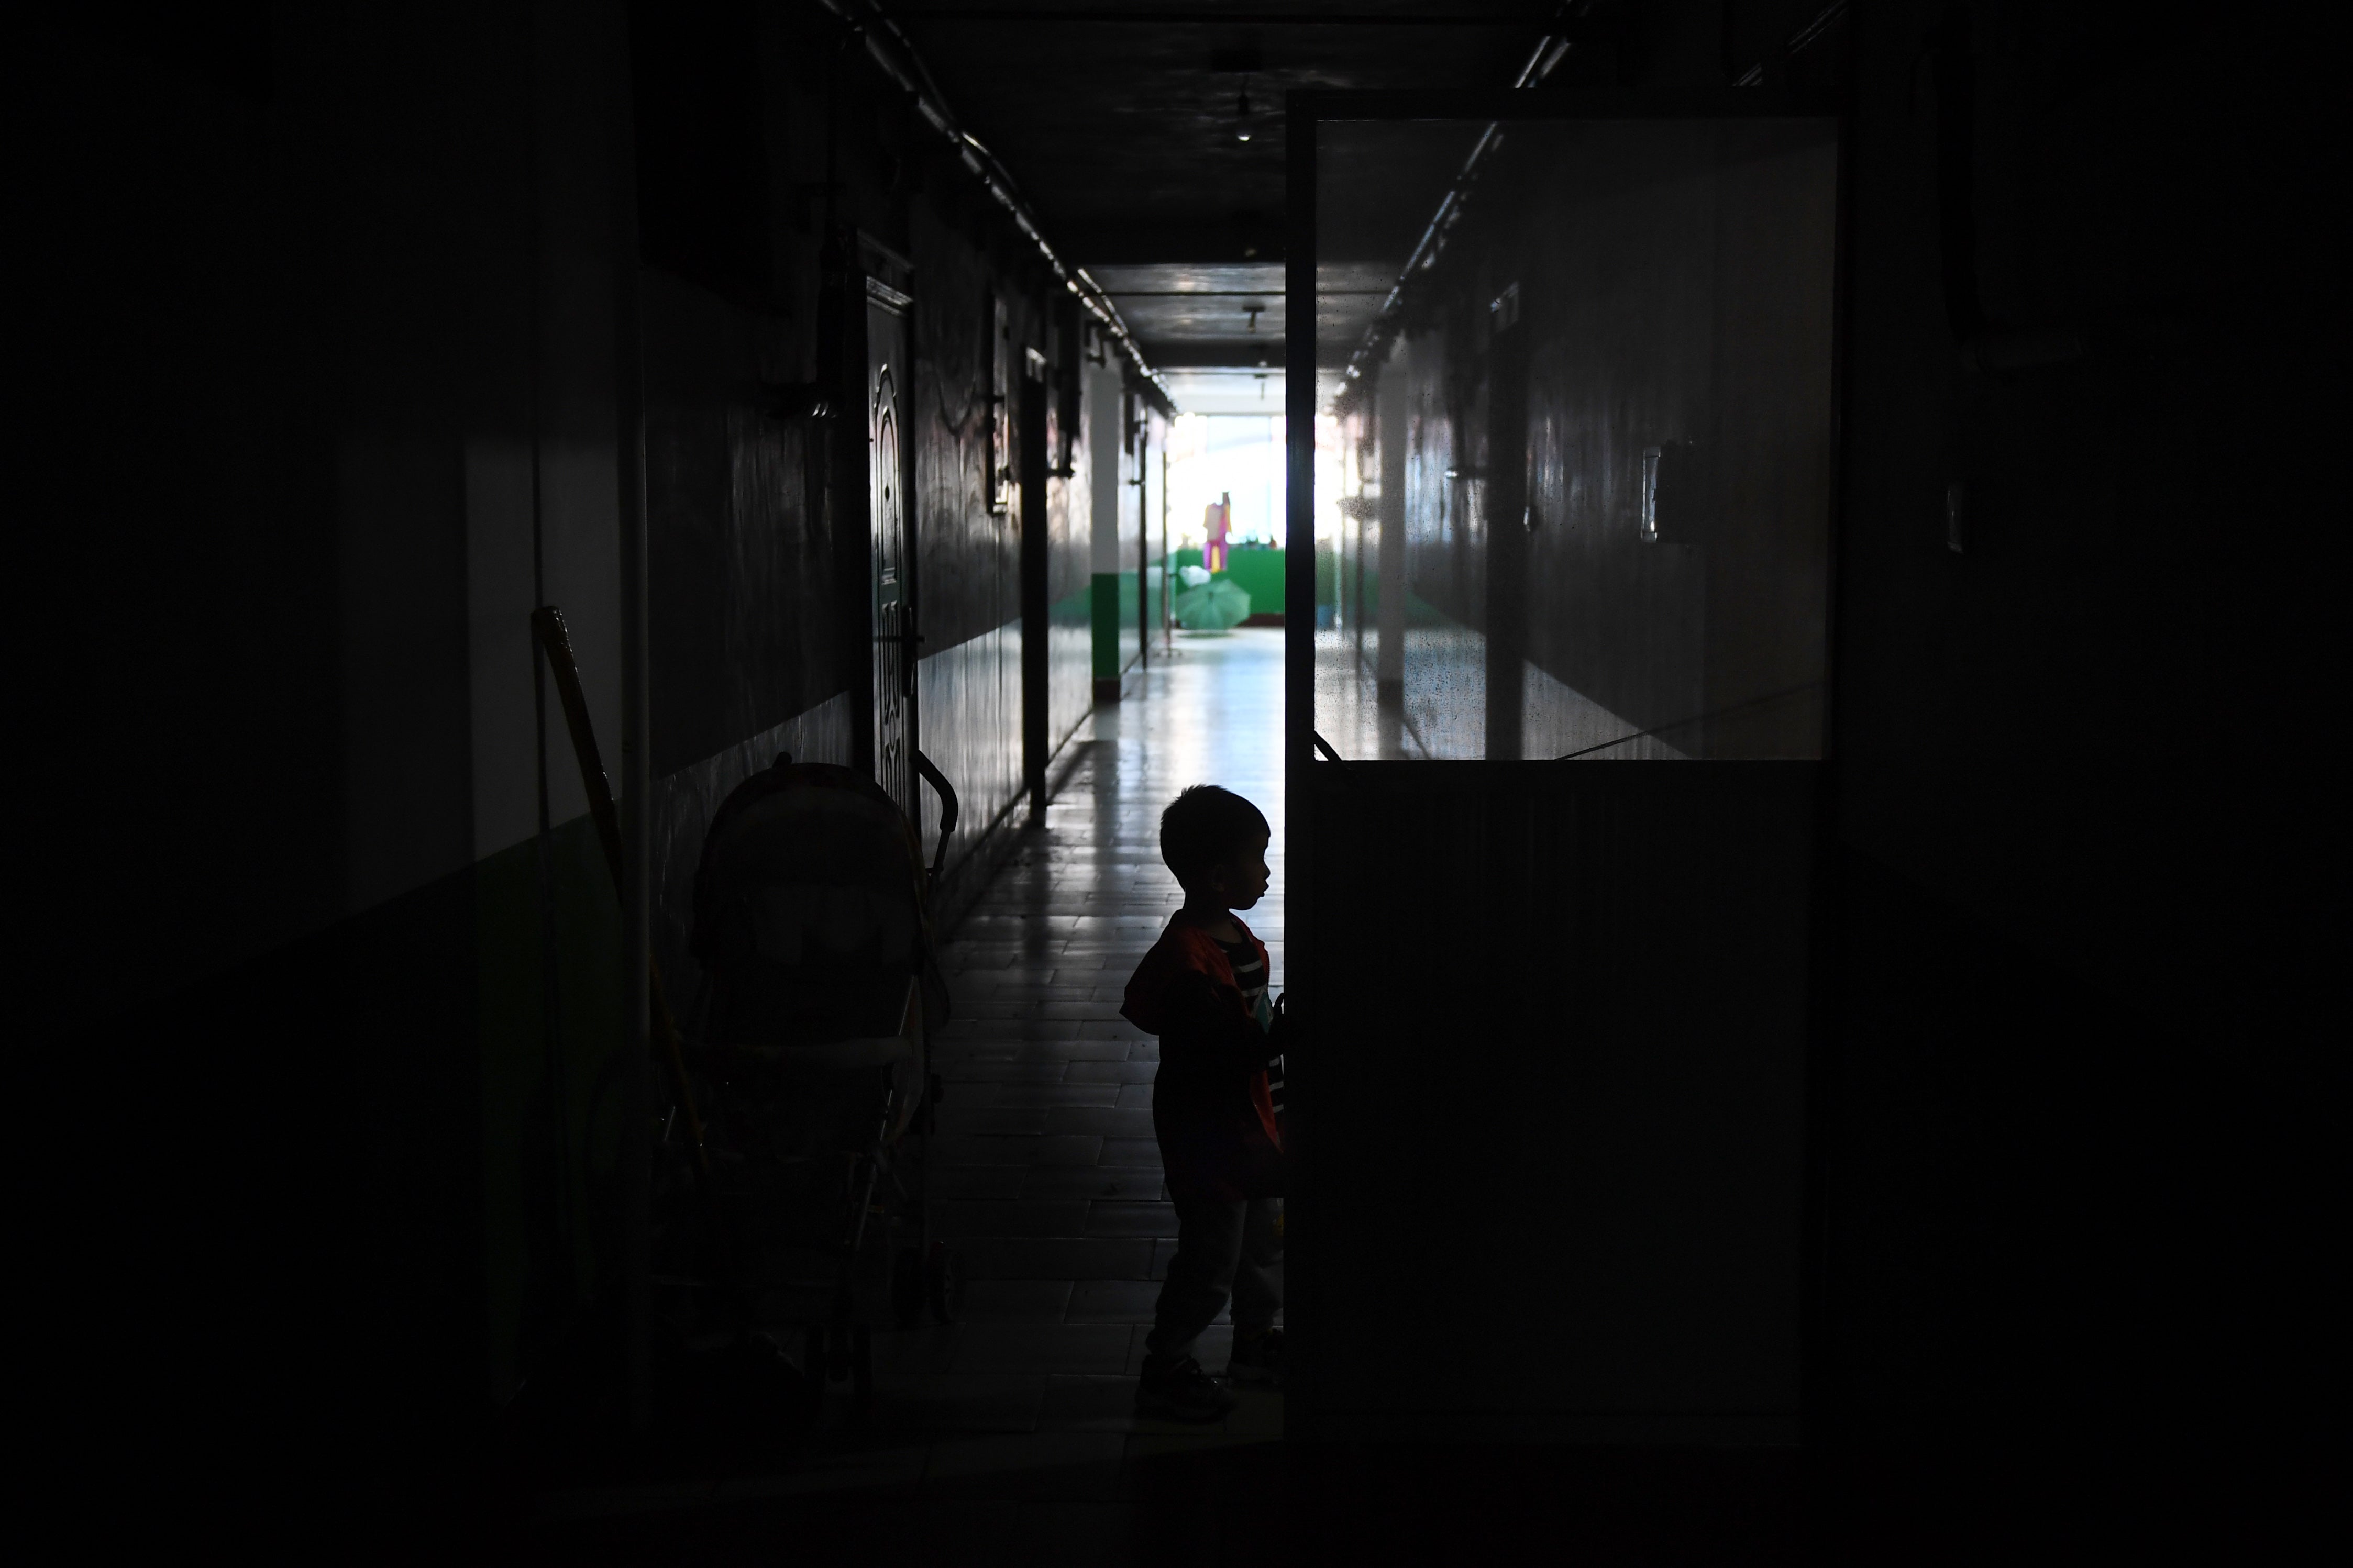 Representative image: A child plays in the corridor of an apartment building in China’s Henan province on 29 September 2017